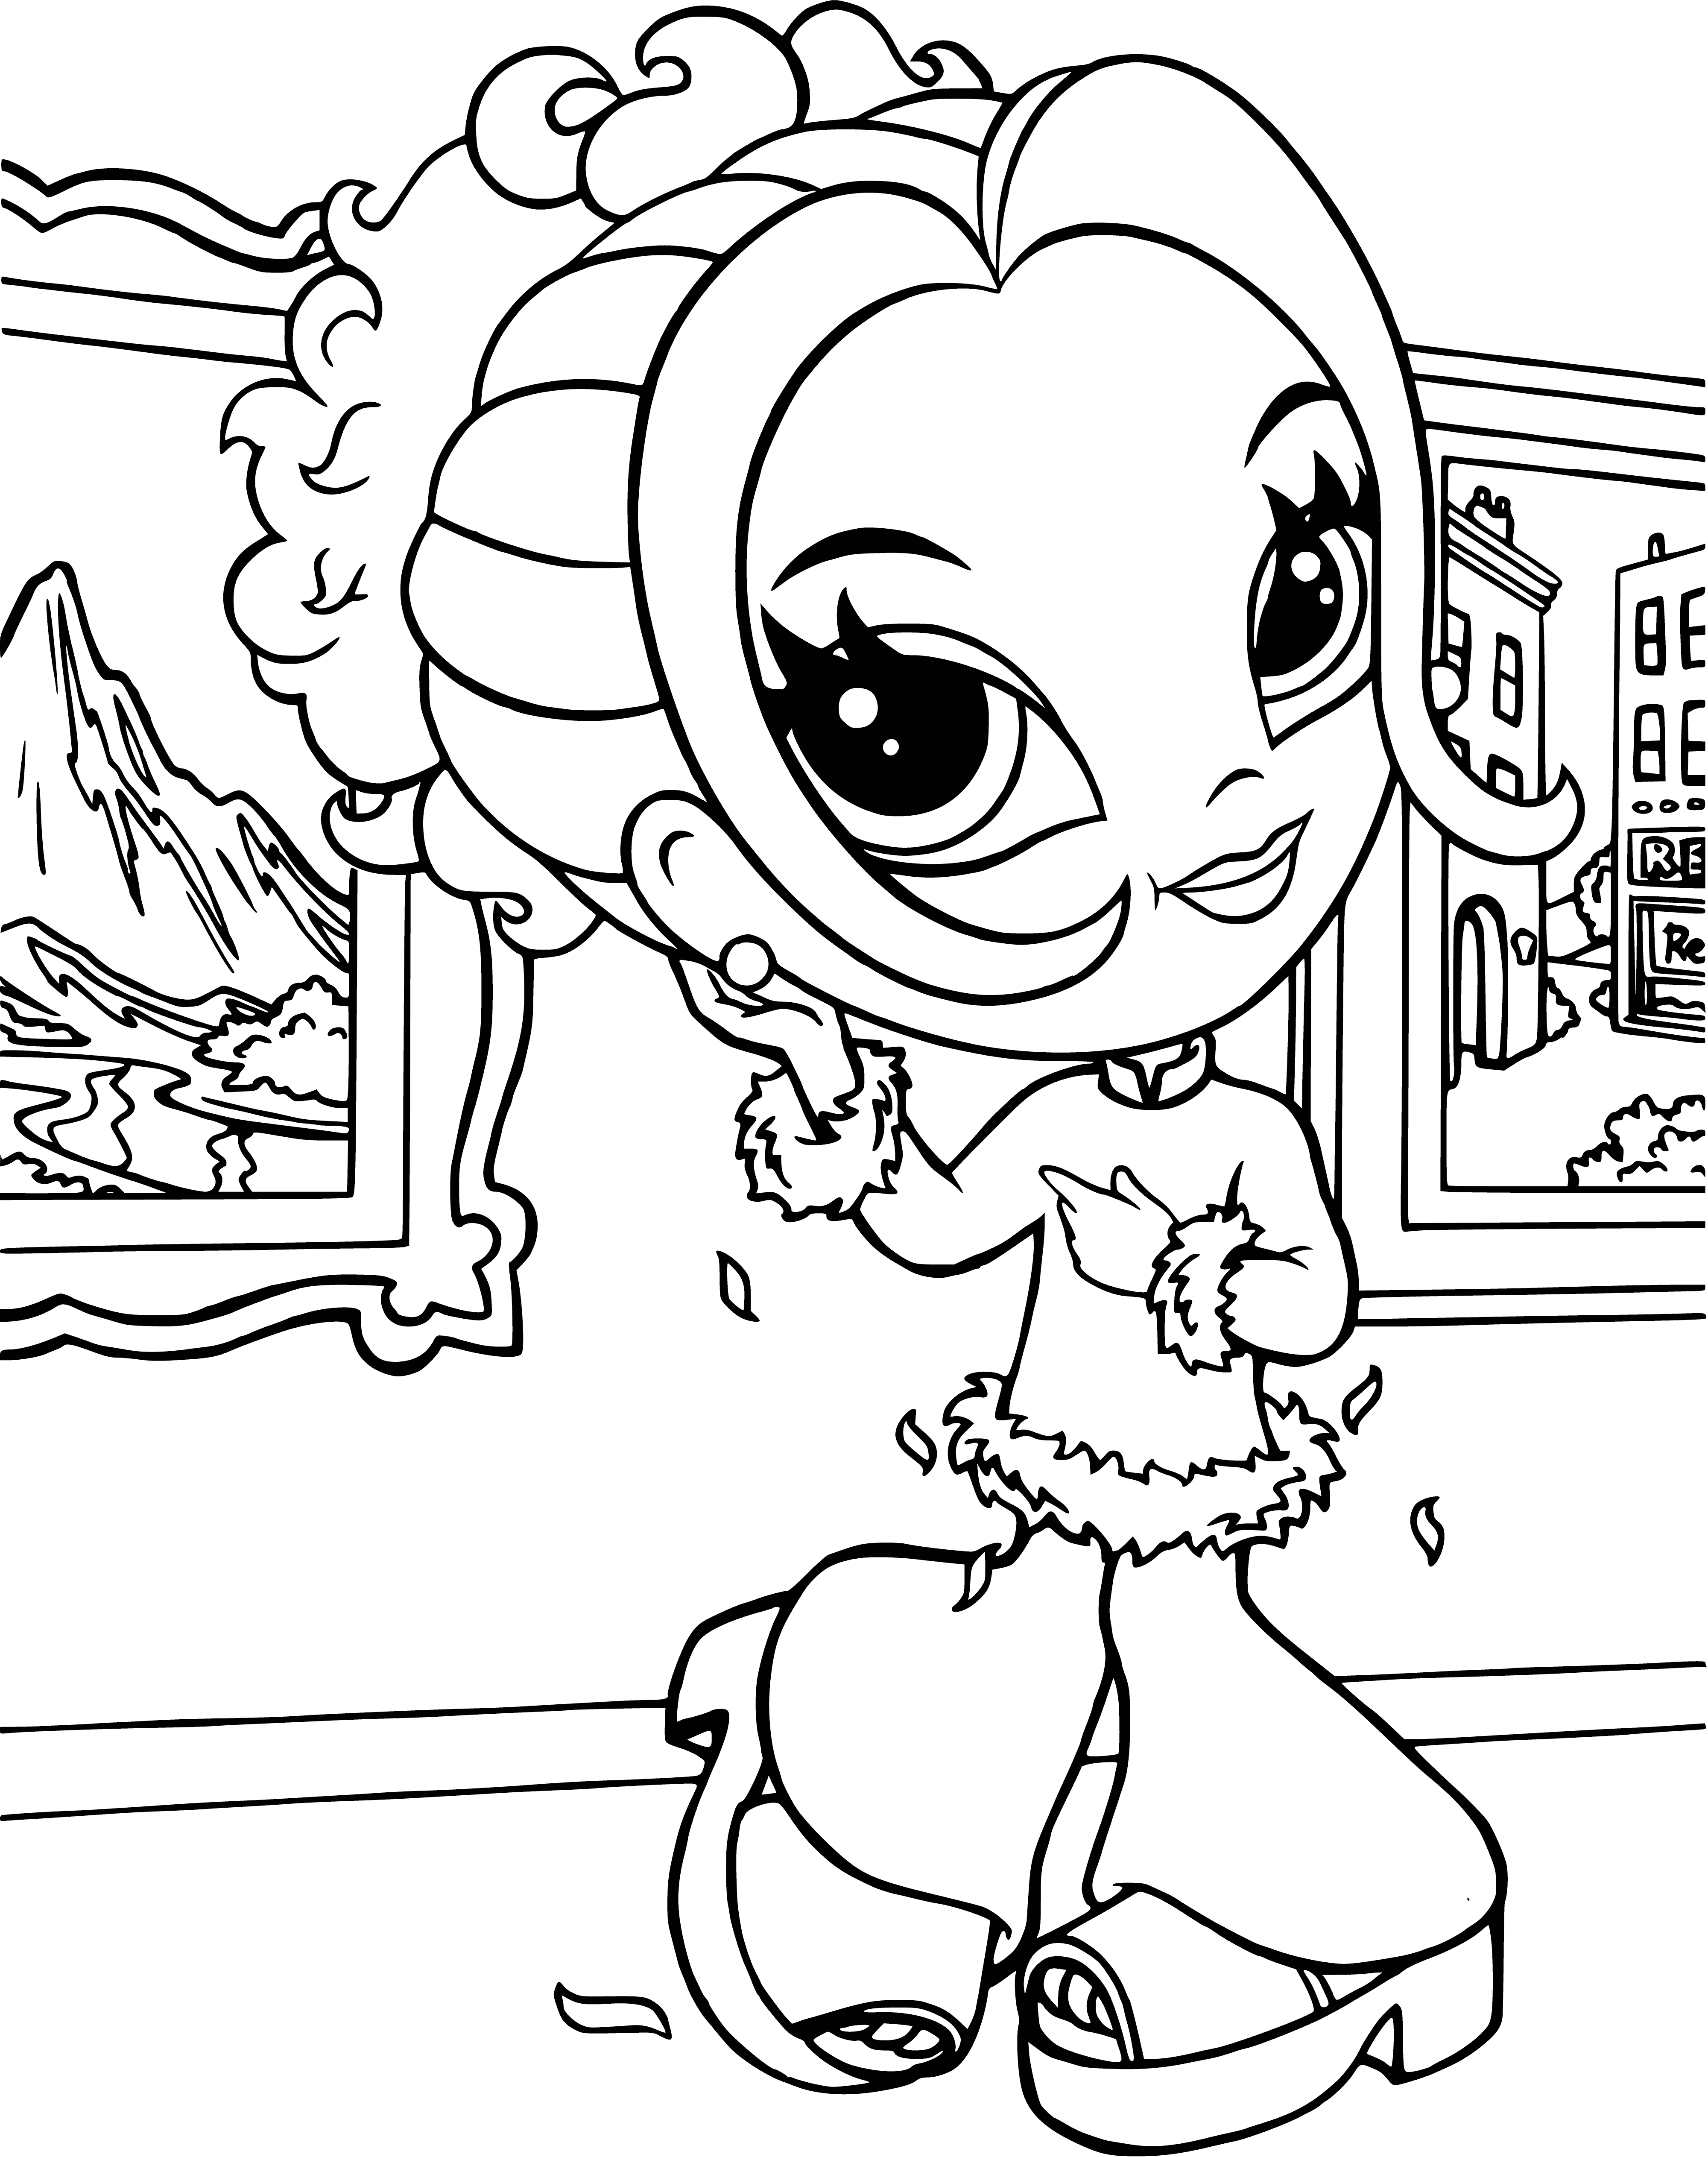 coloring page: Girl ready for a night out, wearing sequined dress, high heels, sleek updo and sparkly jewelry. Big smile says she knows she'll have a great time!